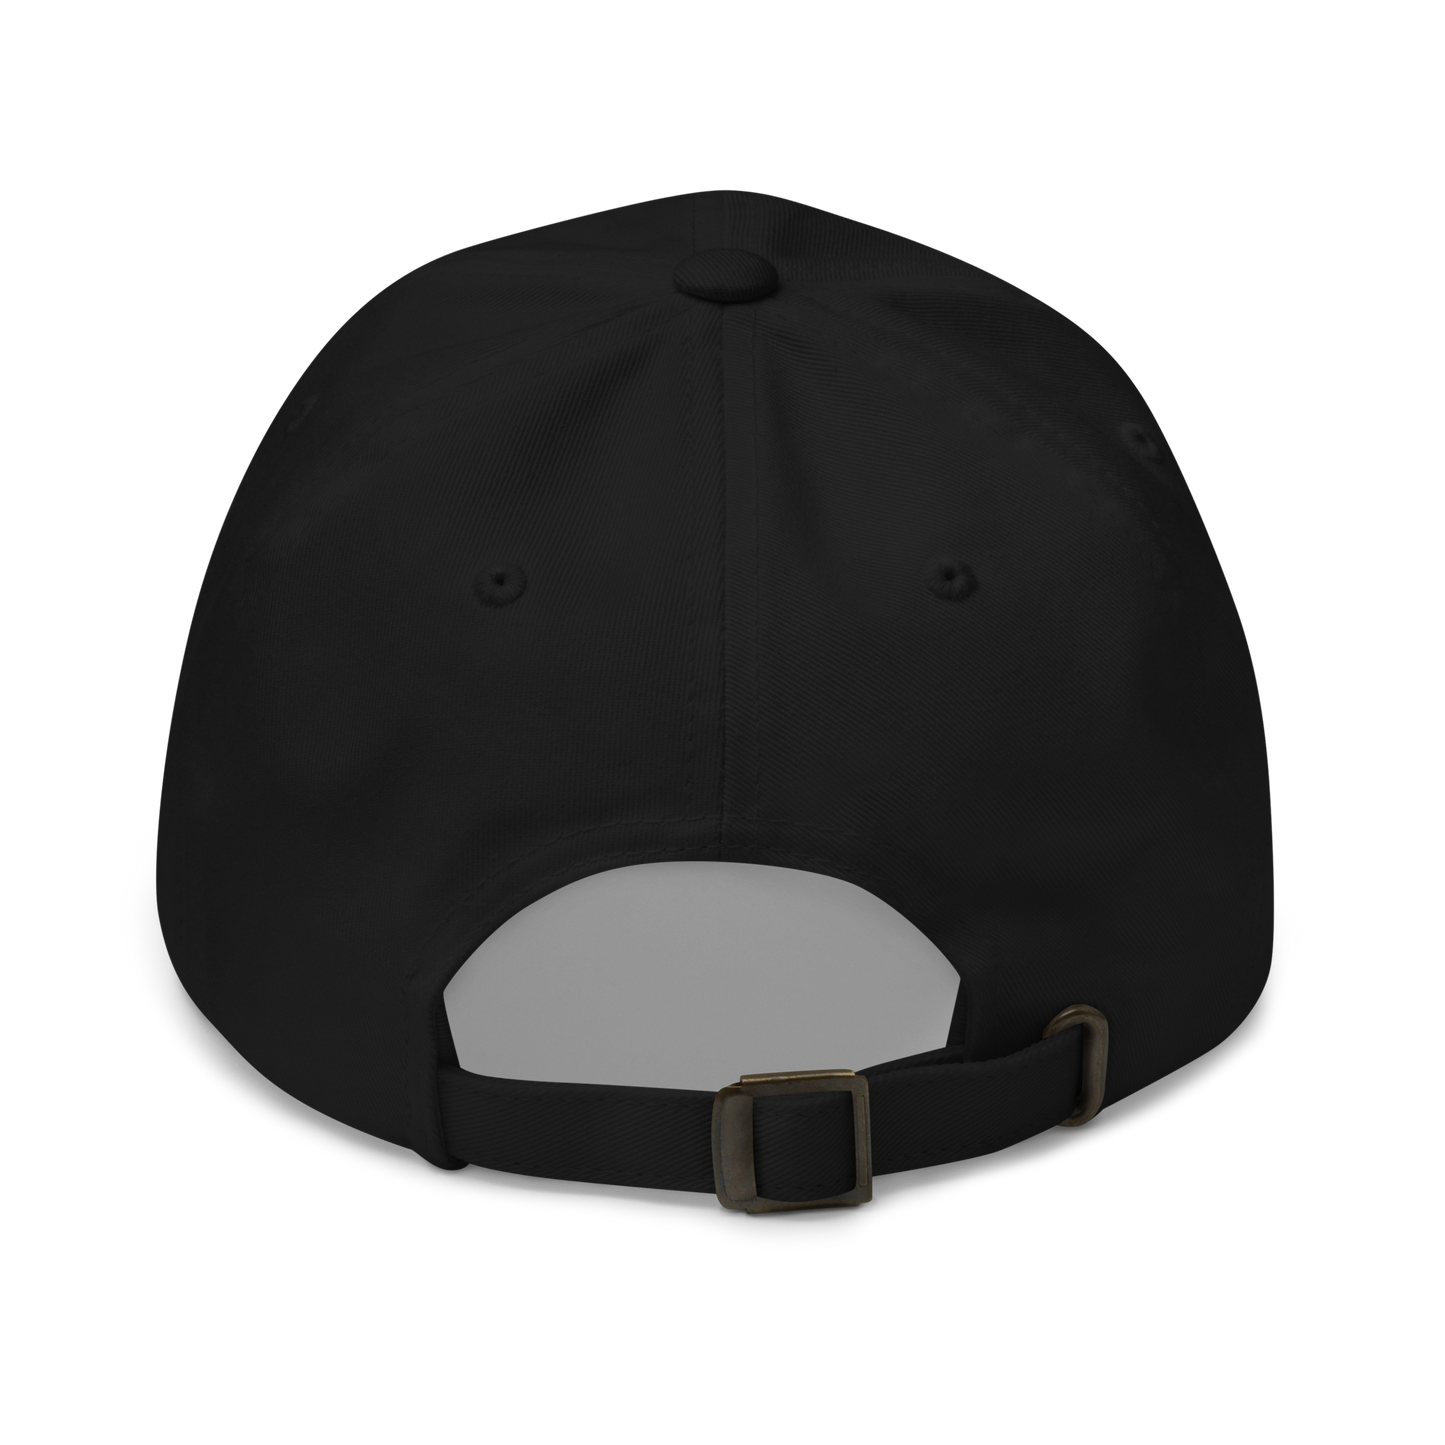 Redeemed (White Embroidered) Hat